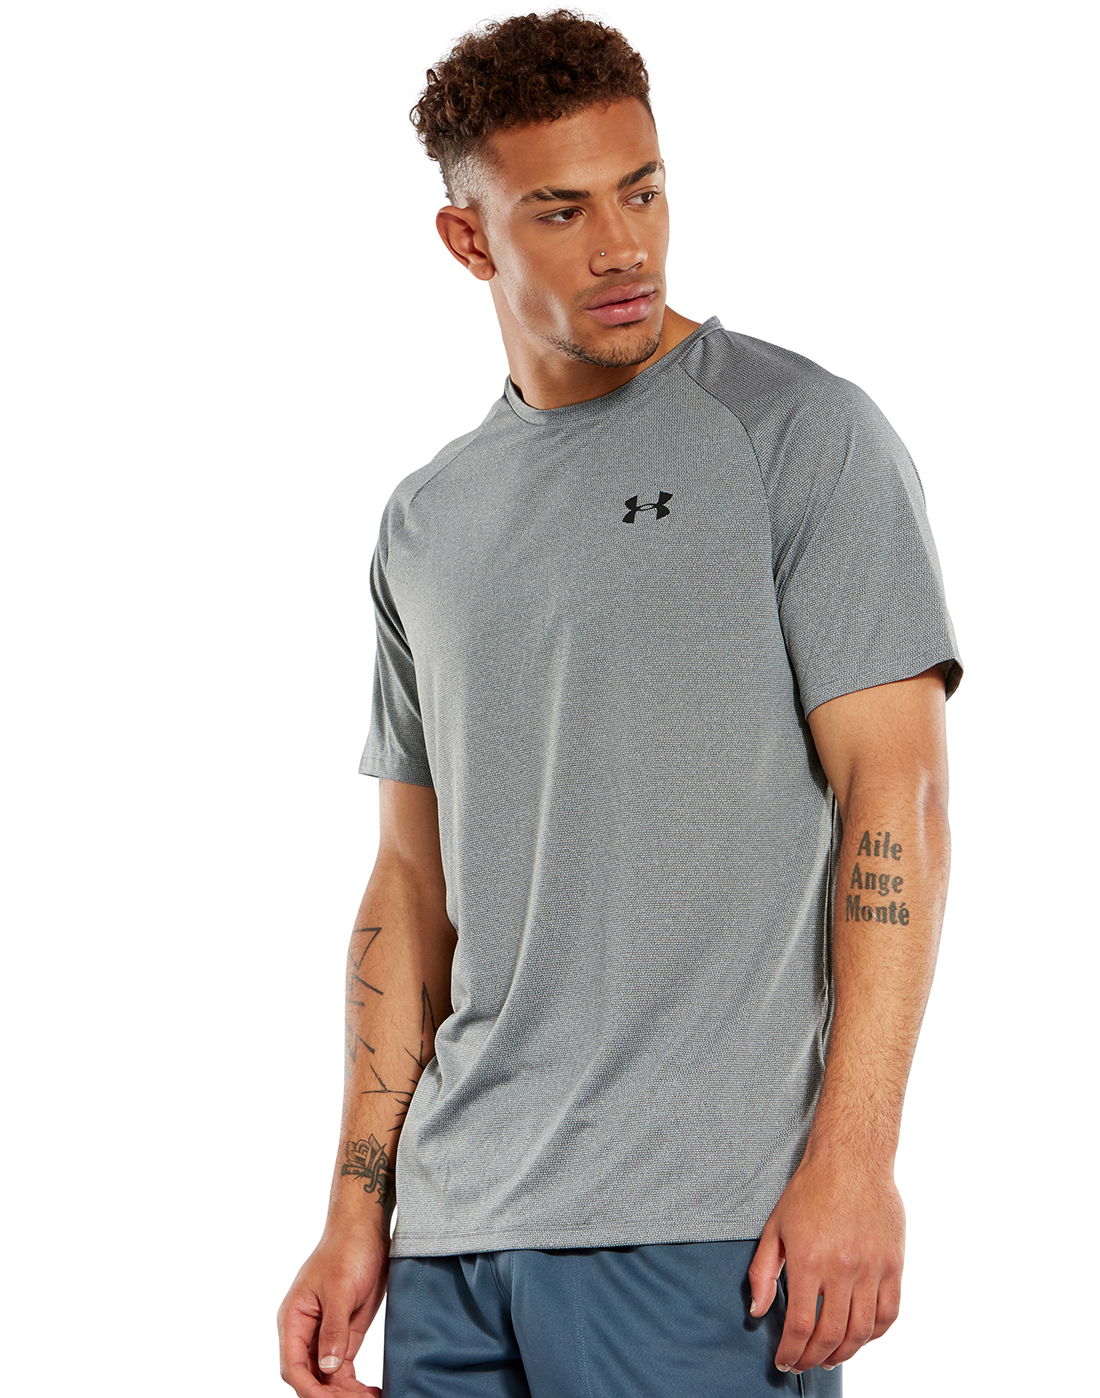 Under Armour Mens Tech 2.0 Novelty T-Shirt - Grey | Life Style Sports IE